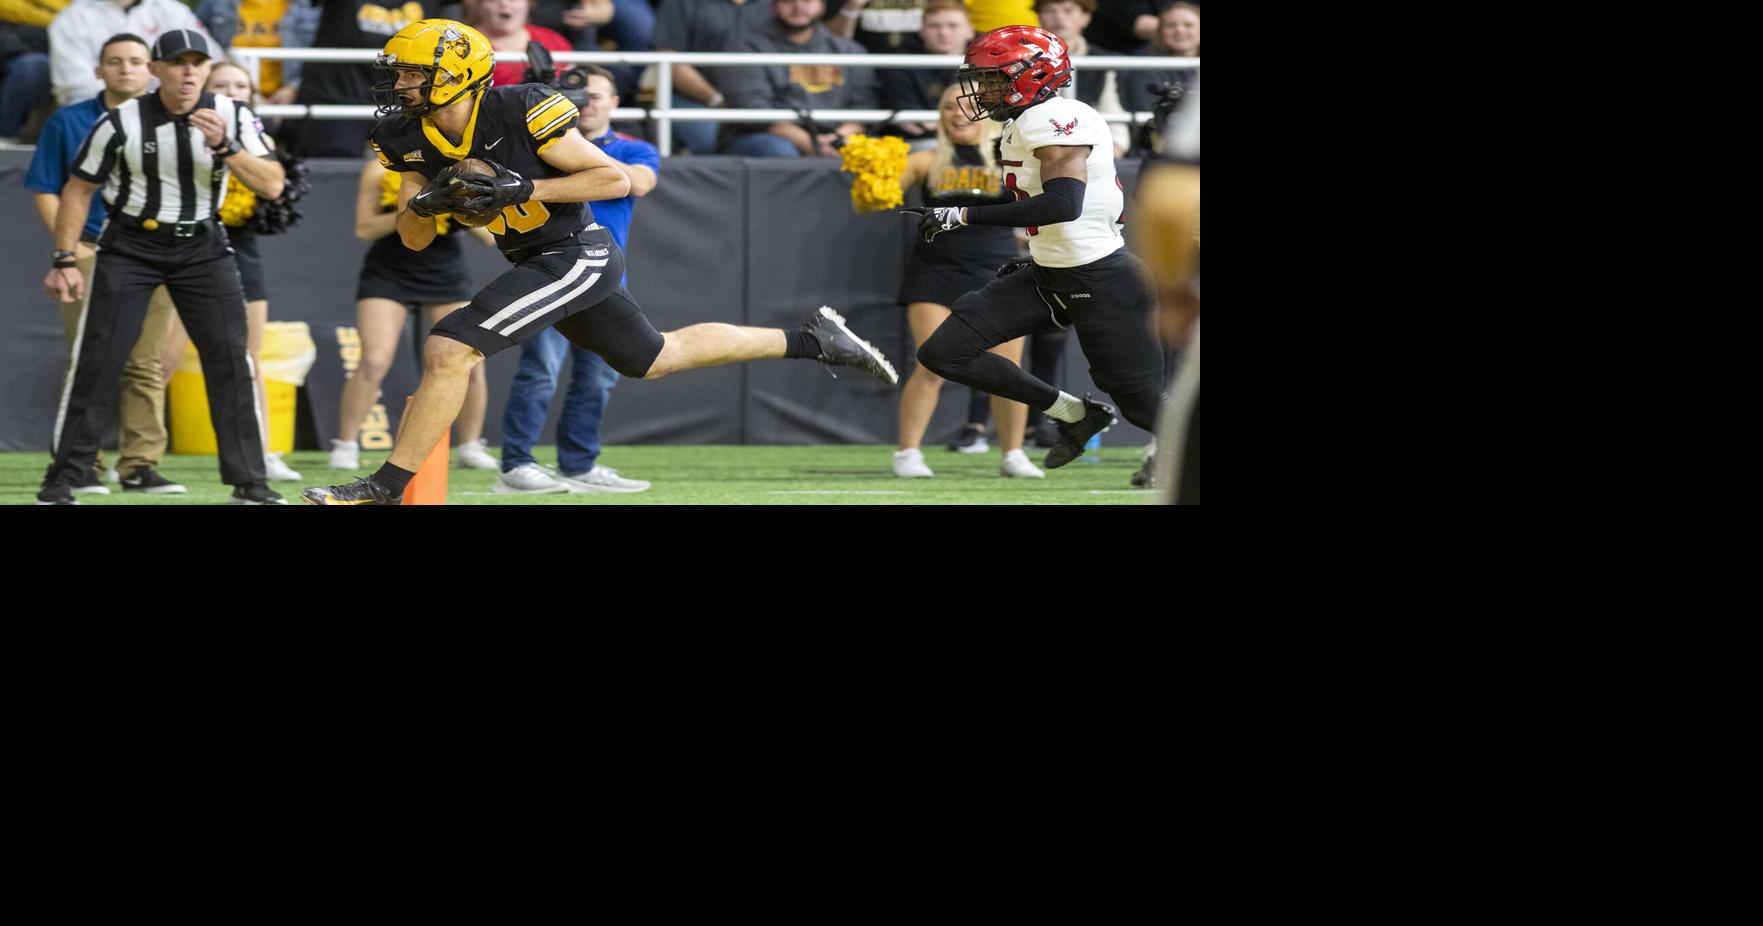 Idaho receiver Hatten earns All-American accolades